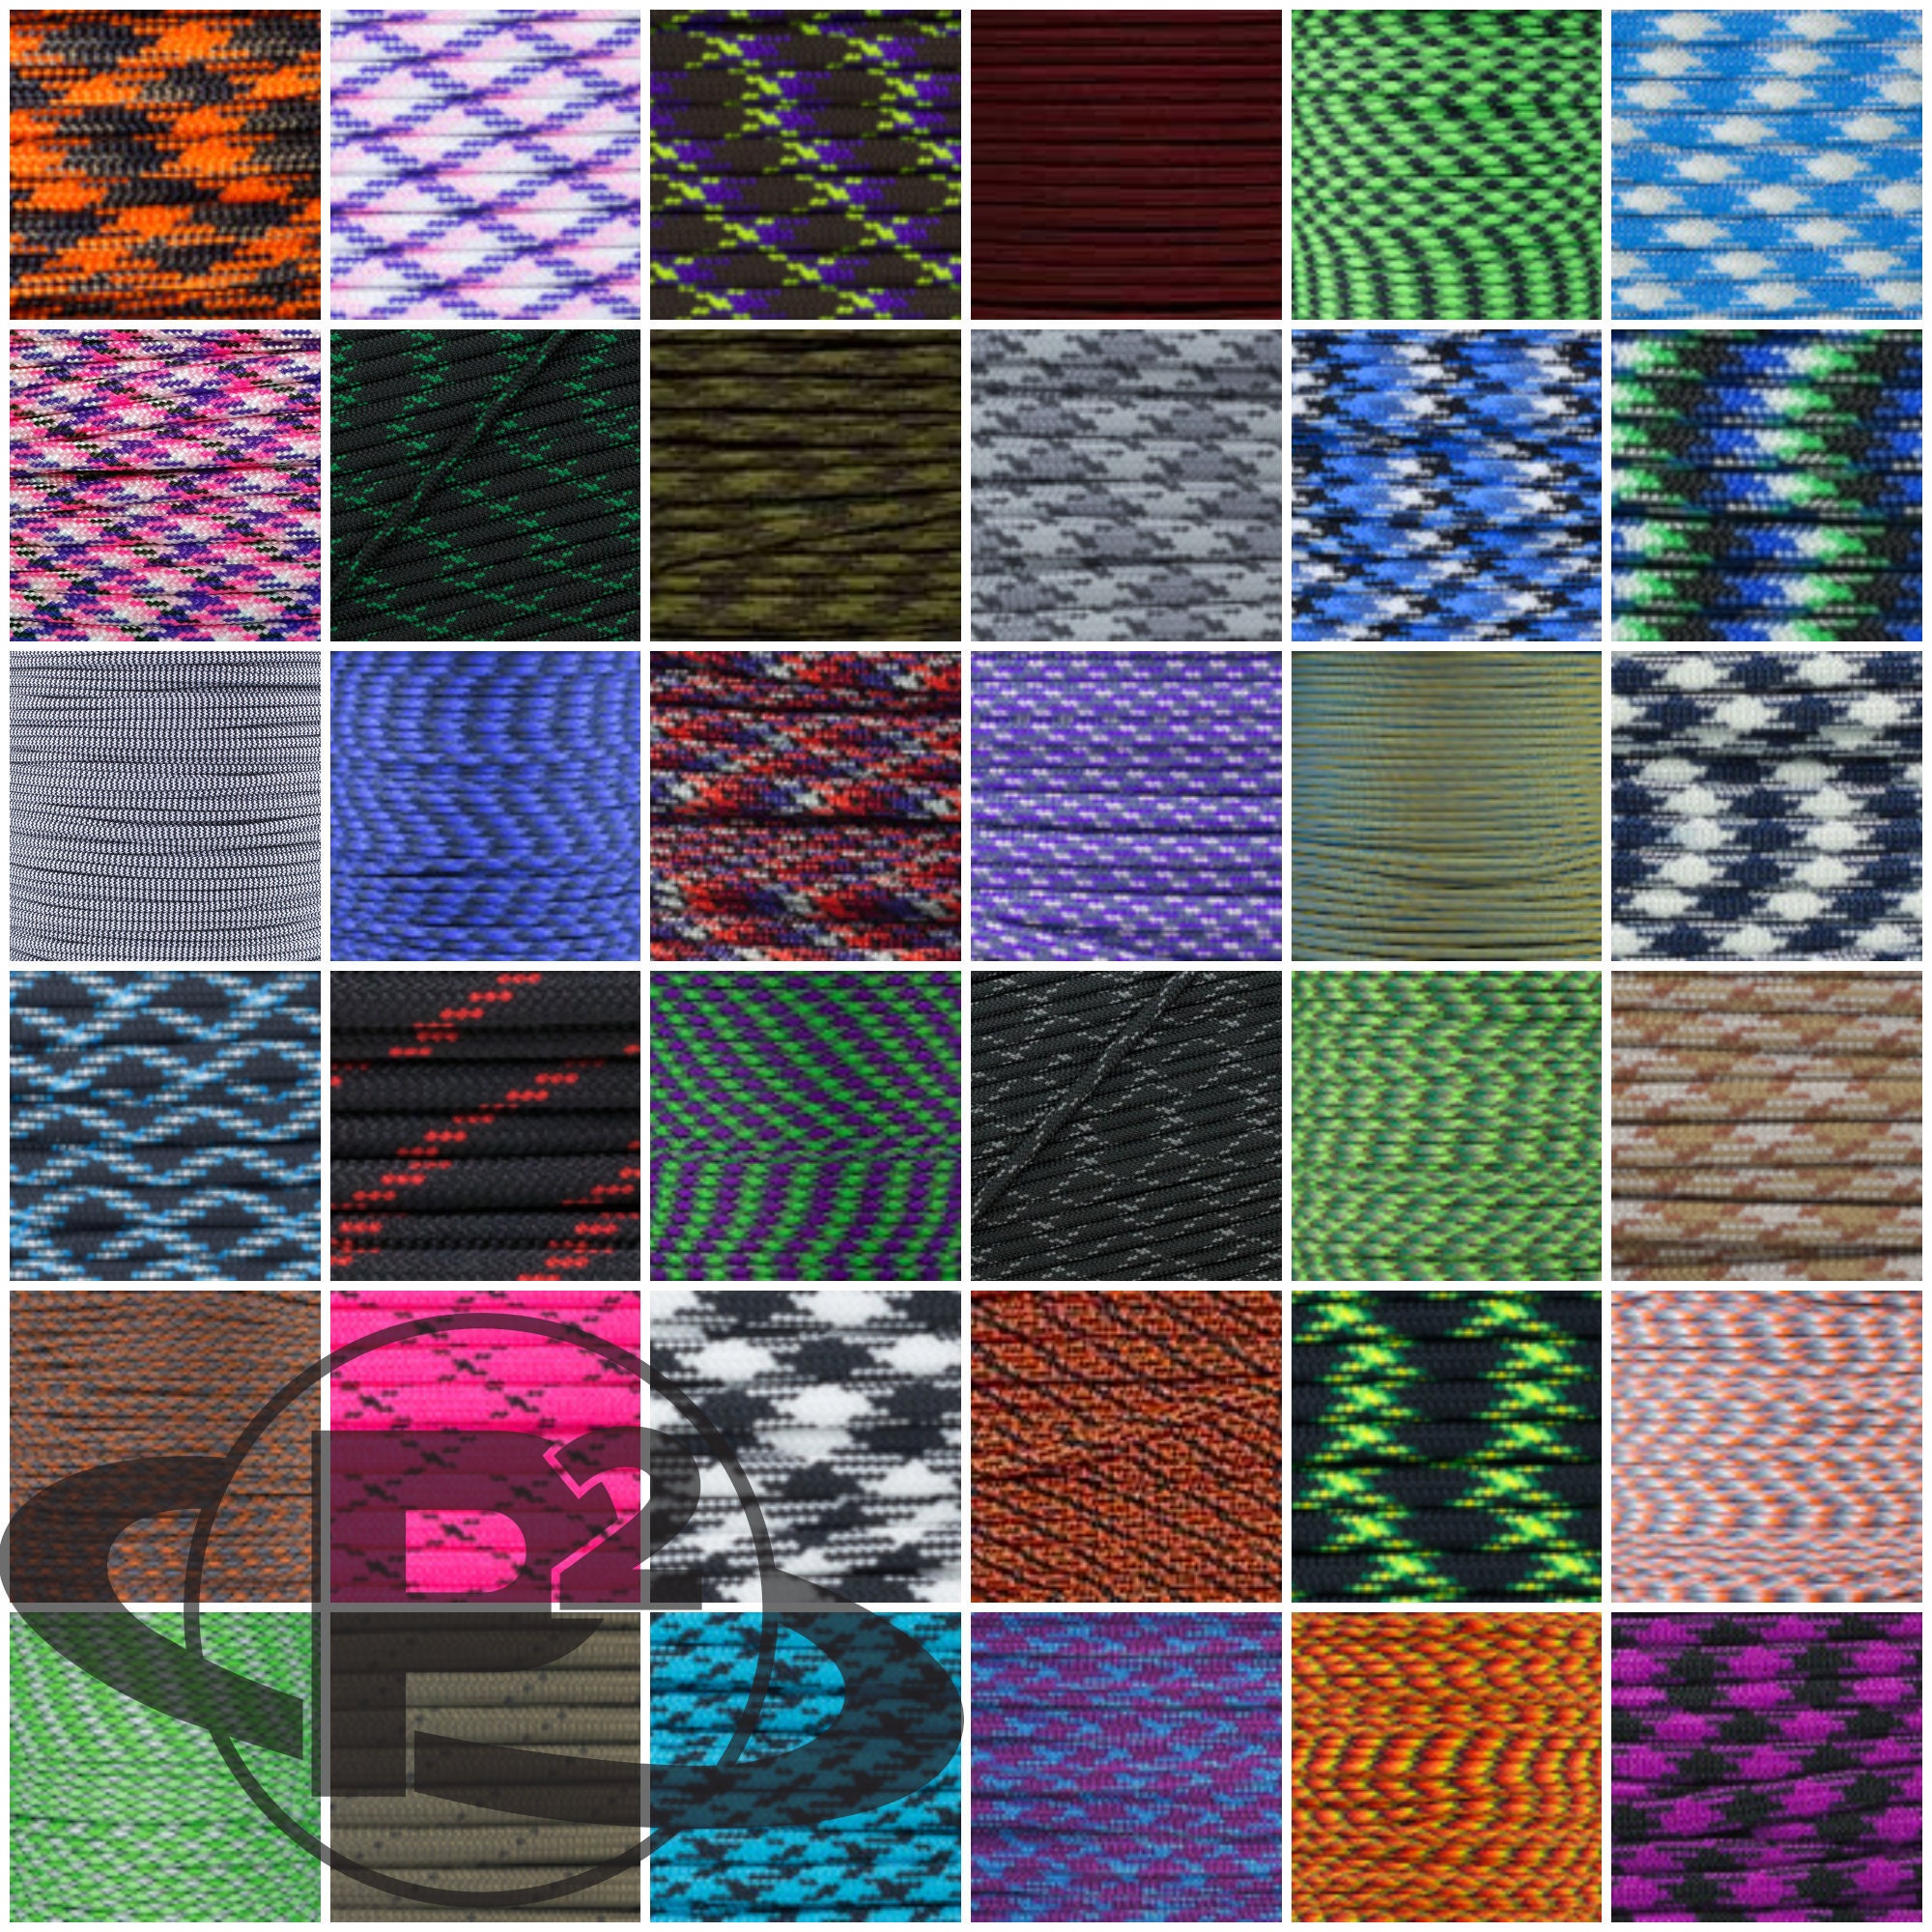 Sgt Knots Type III Paracord Rope - 550 Paracord for Camping, Hiking, Crafts - Survival Paracord and Parachute Cord for Outdoor Adventure - Reflective